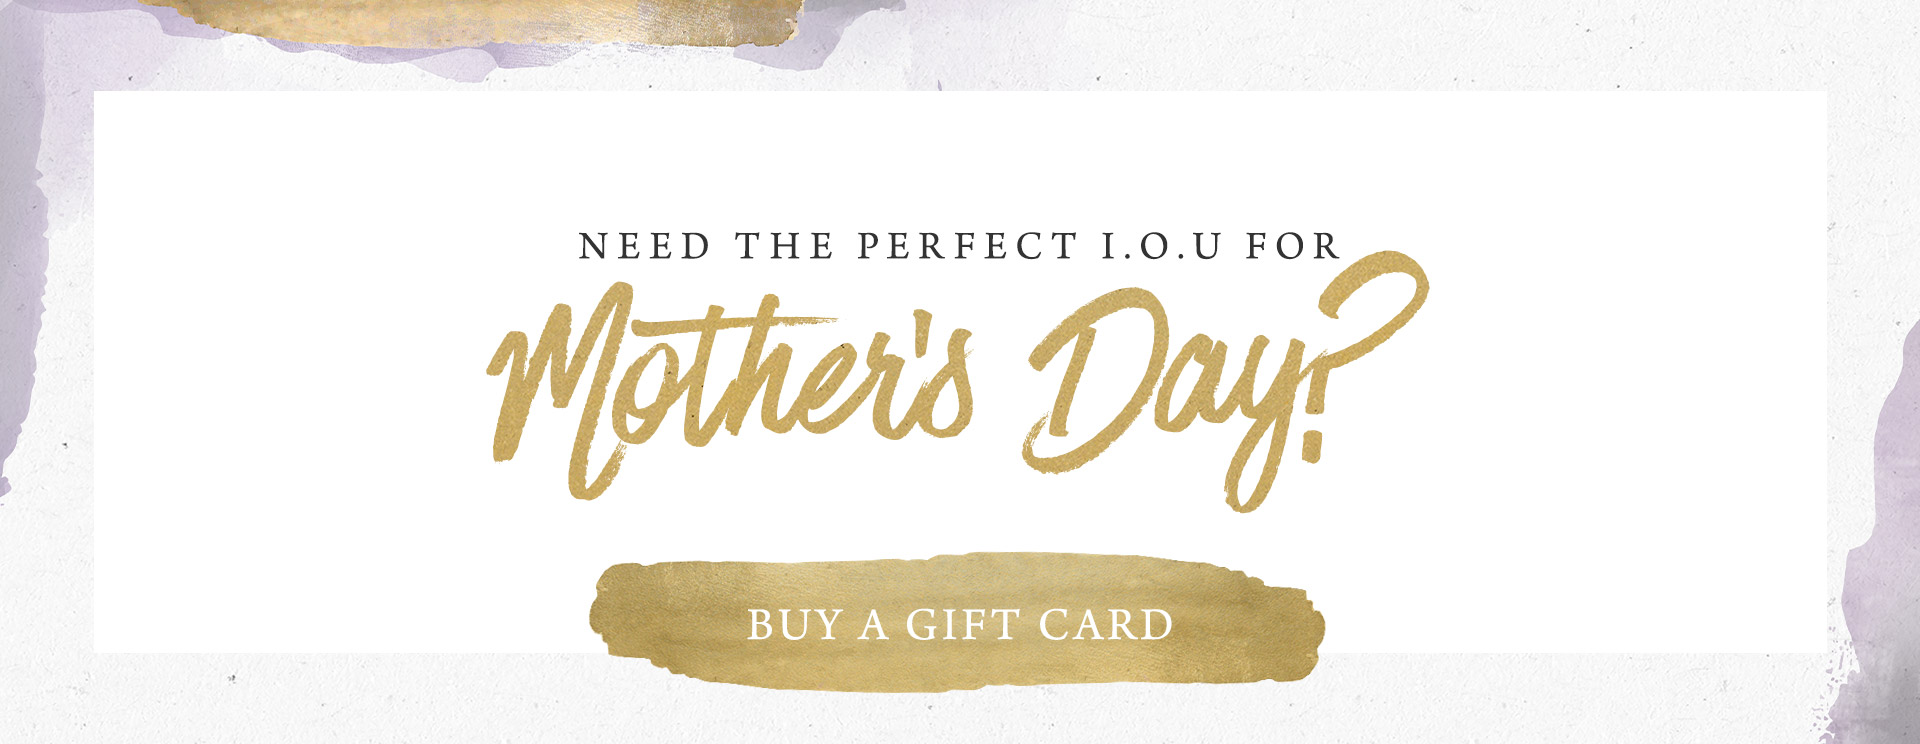 Mother's Day 2019 at The Red Lion